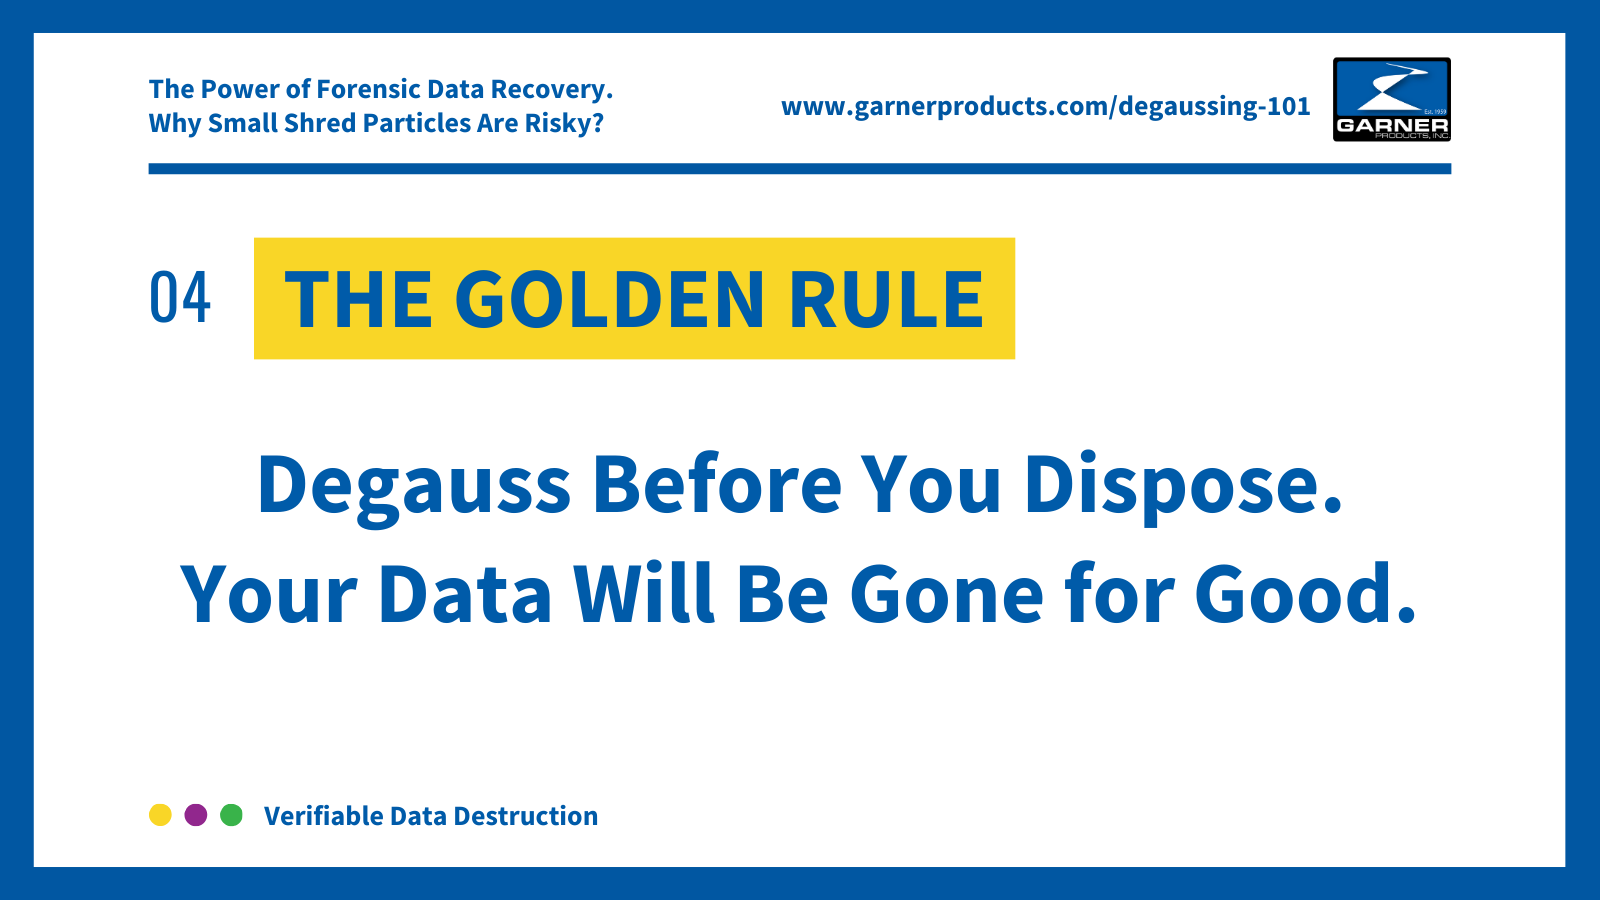 The Golden Rule - Degaussing before you dispose